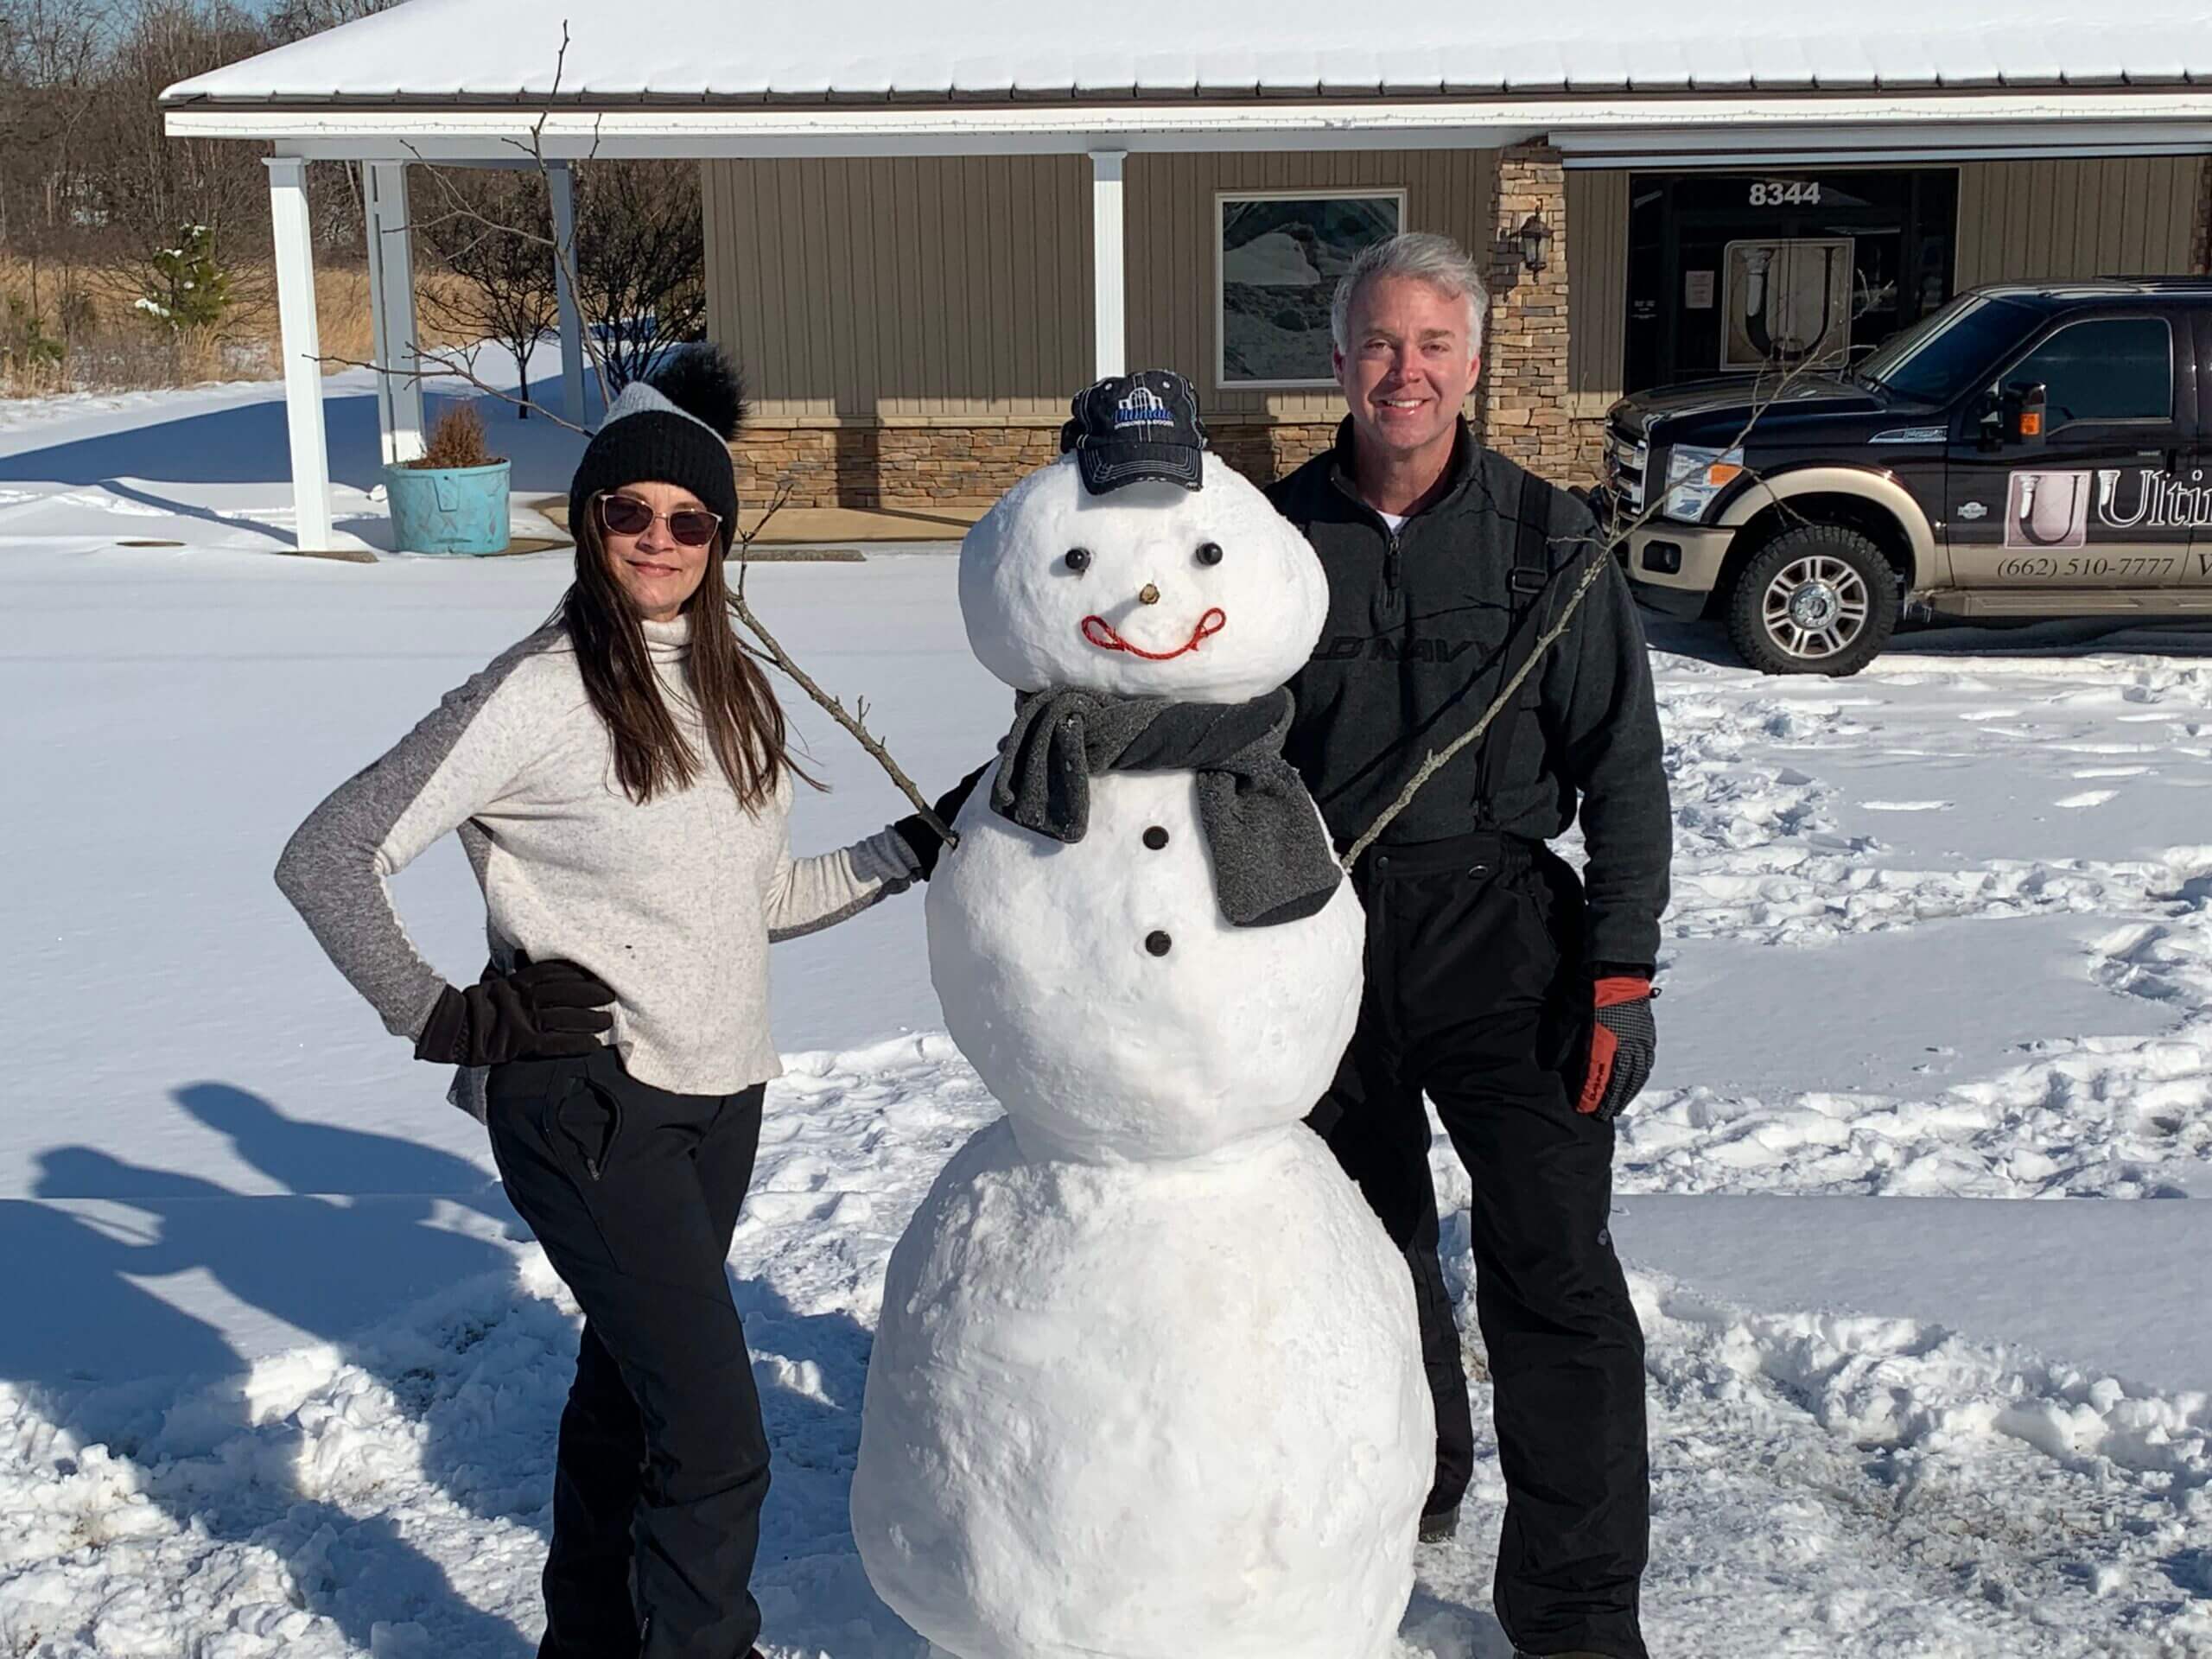 Building the 'ultimate snowman'